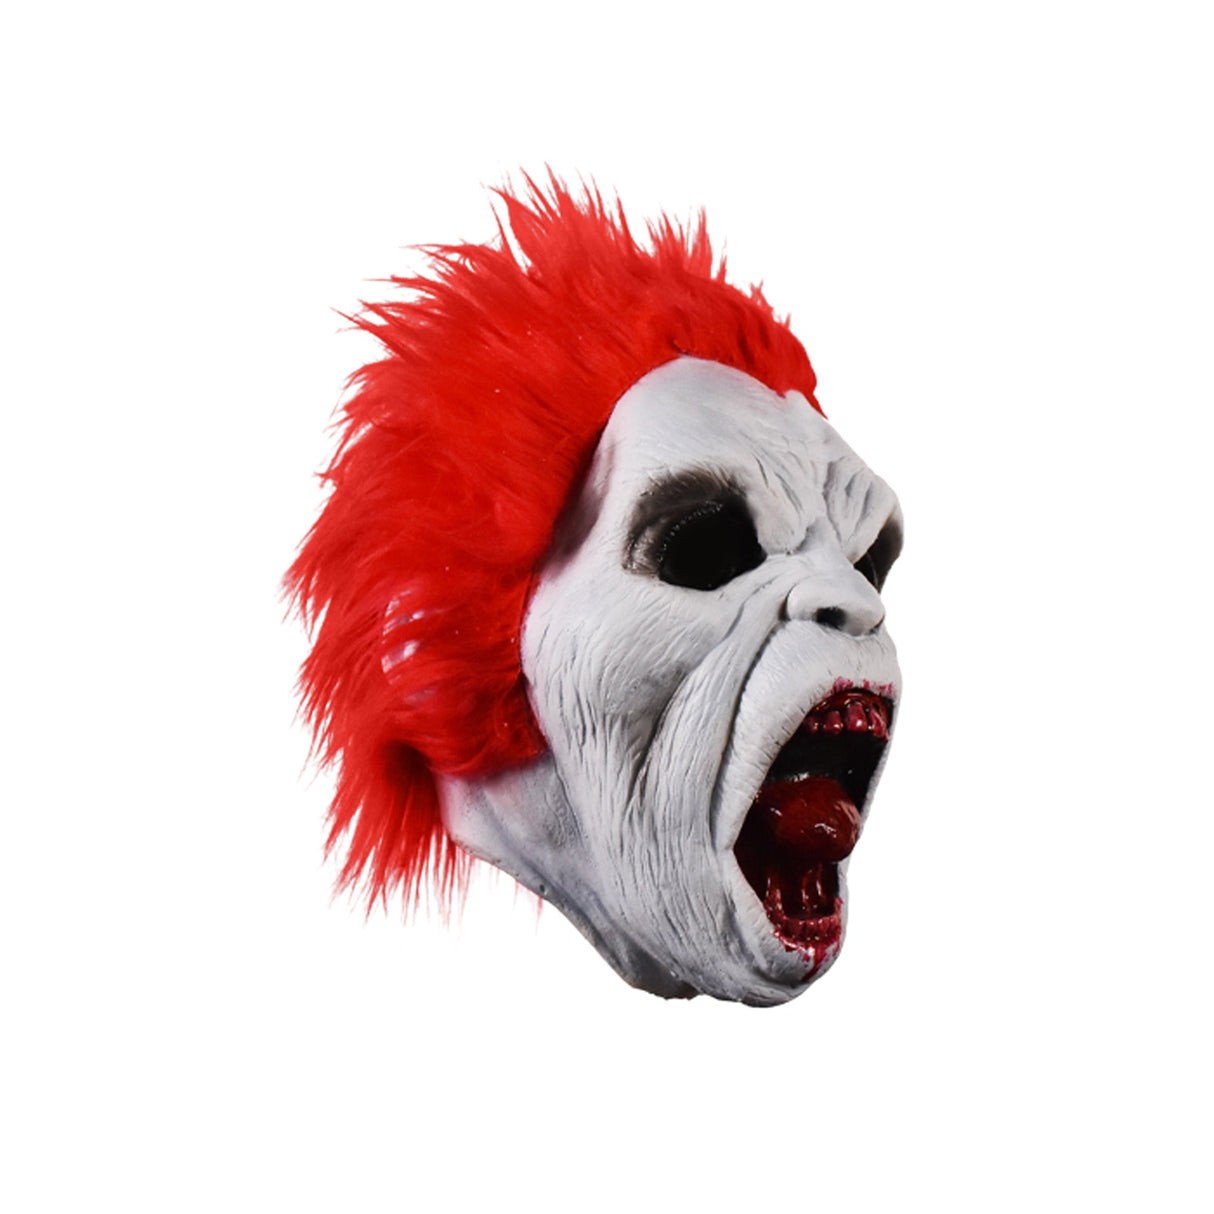 TRICK OR TREAT STUDIOS INC Costume Accessories The Return of the Living Dead Trash Zombie Mask for Adults 811501031284